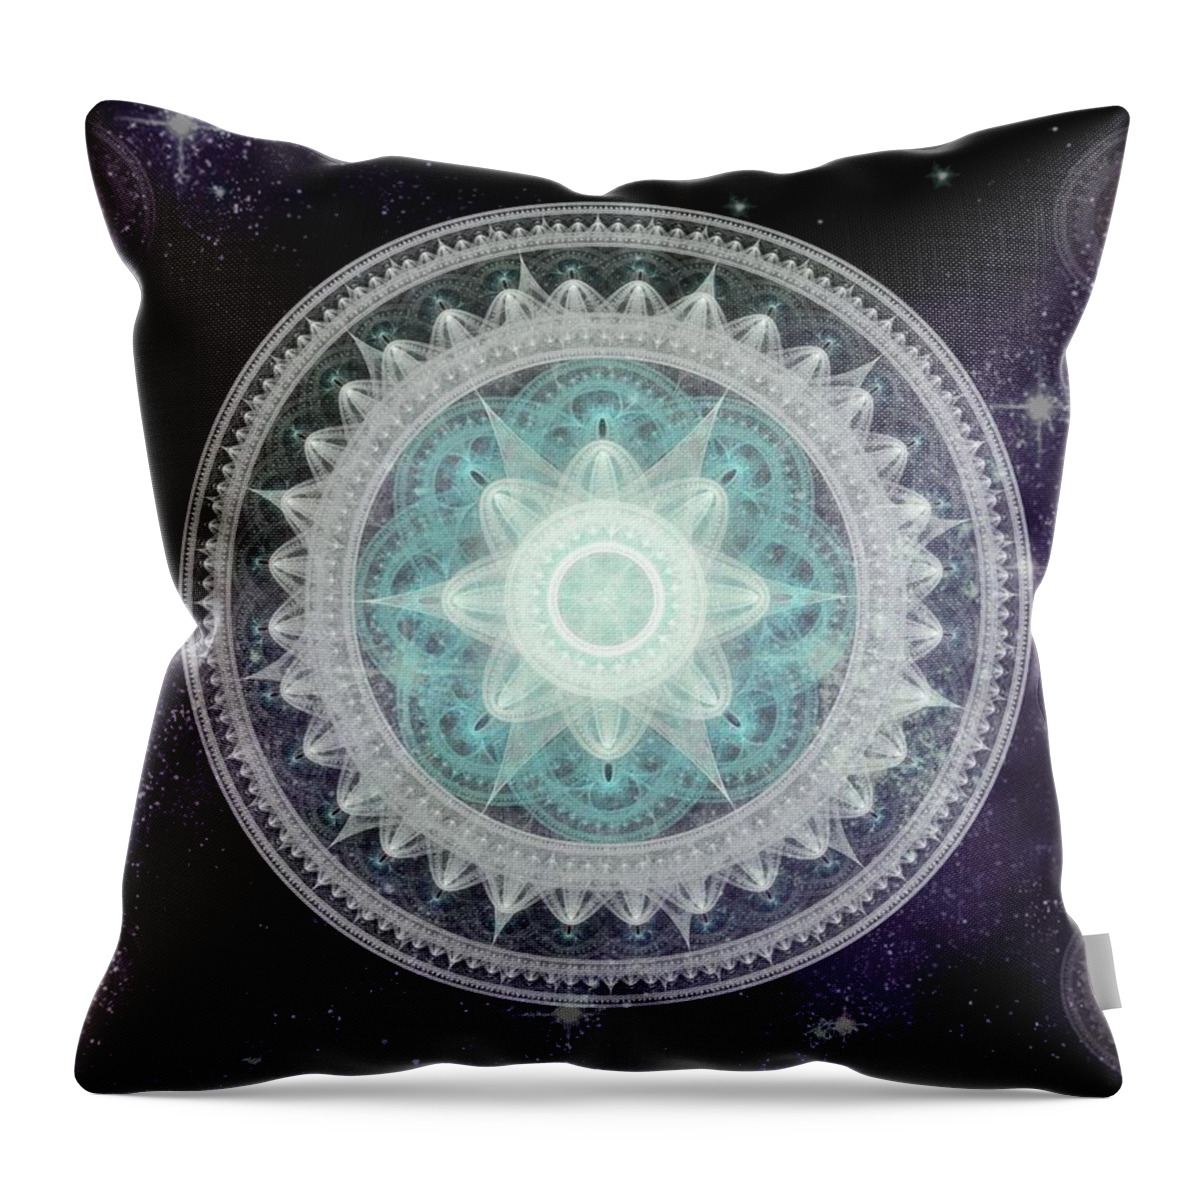 Corporate Throw Pillow featuring the digital art Cosmic Medallions Water by Shawn Dall